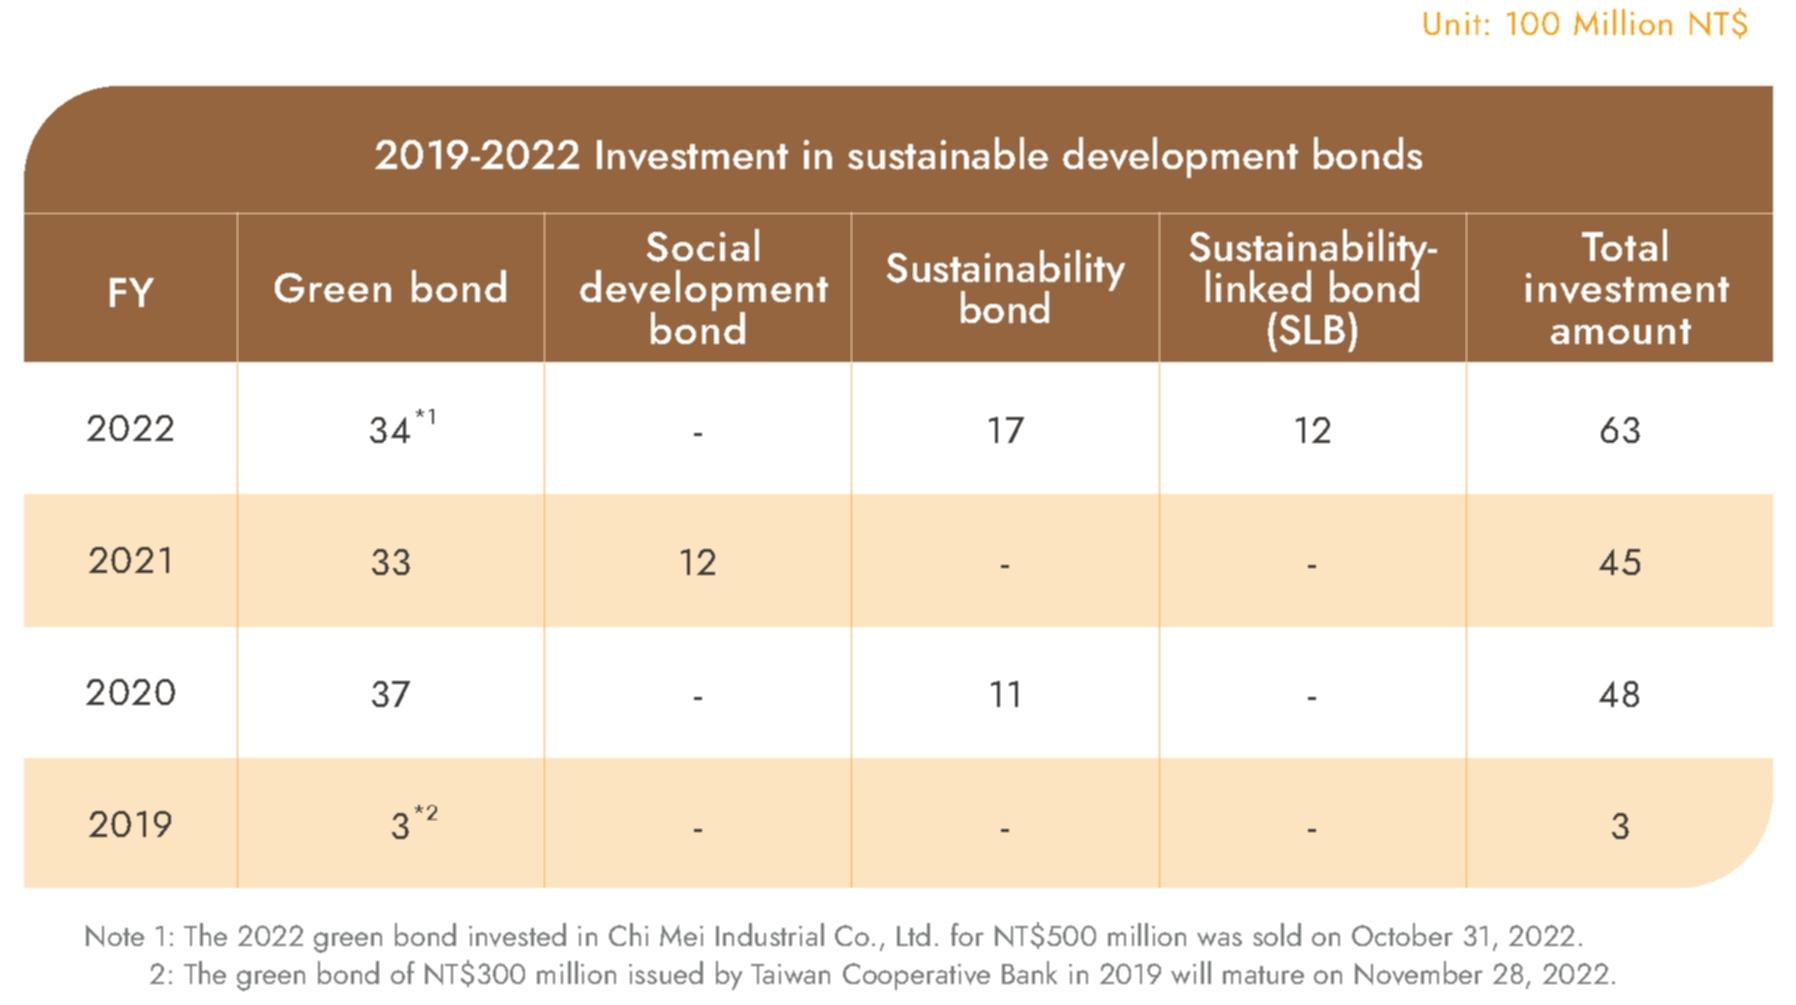 Investment in sustainable development bonds in the past 4 years